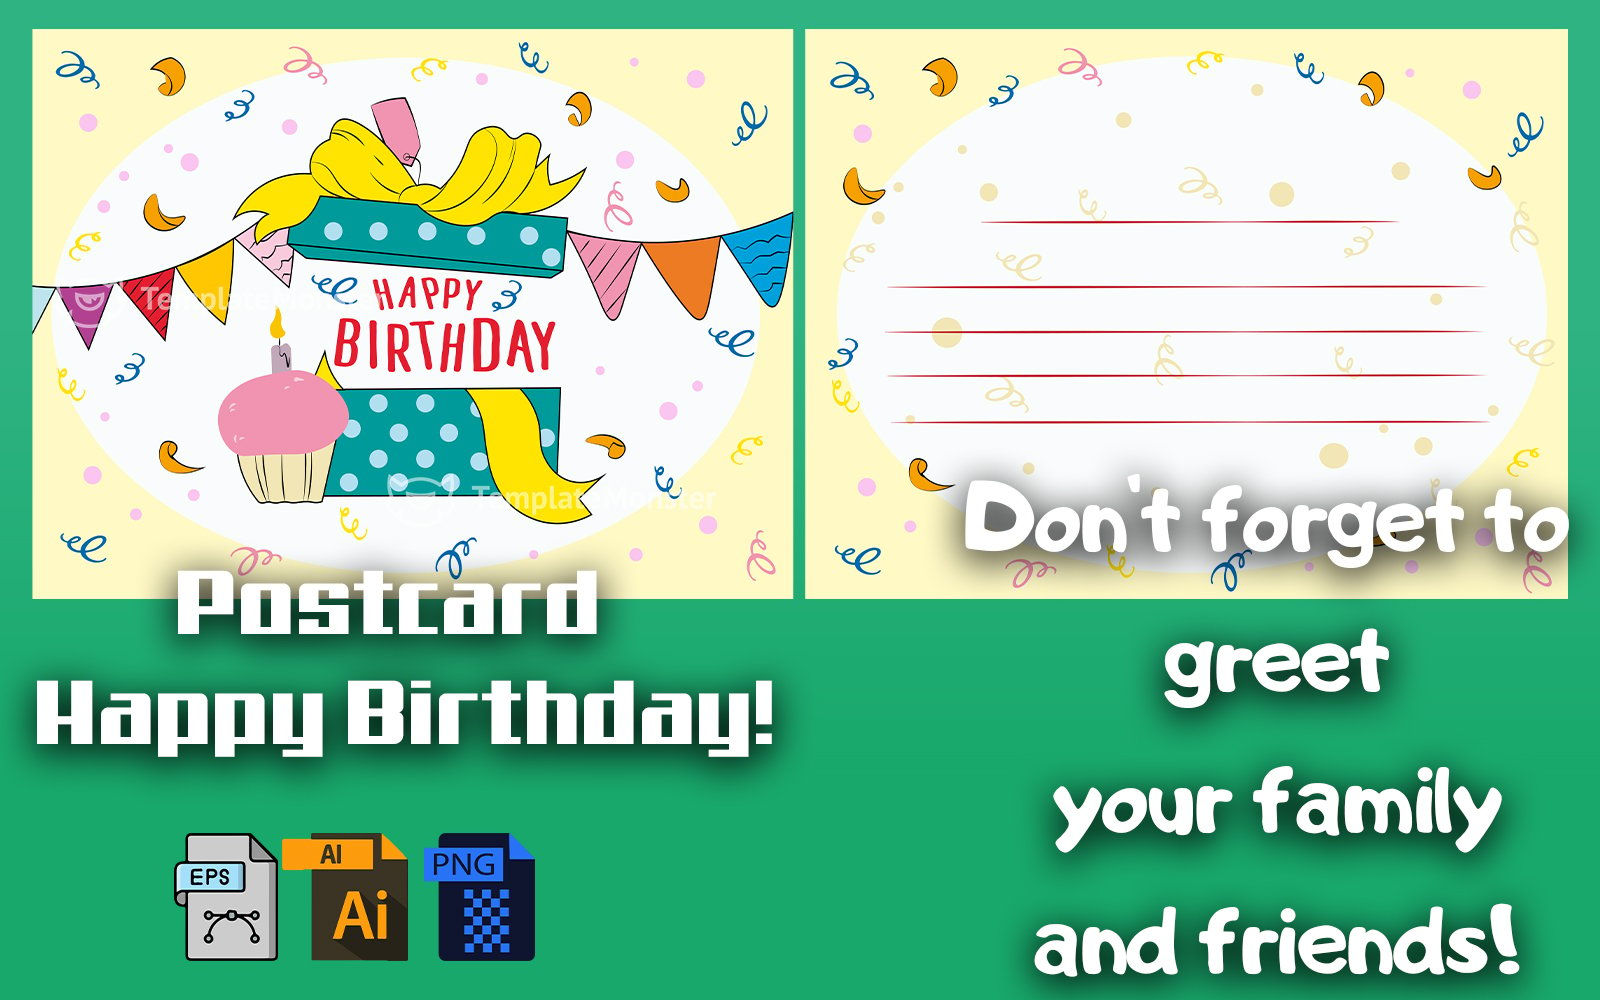 Template #373498 Happy Birthday Webdesign Template - Logo template Preview